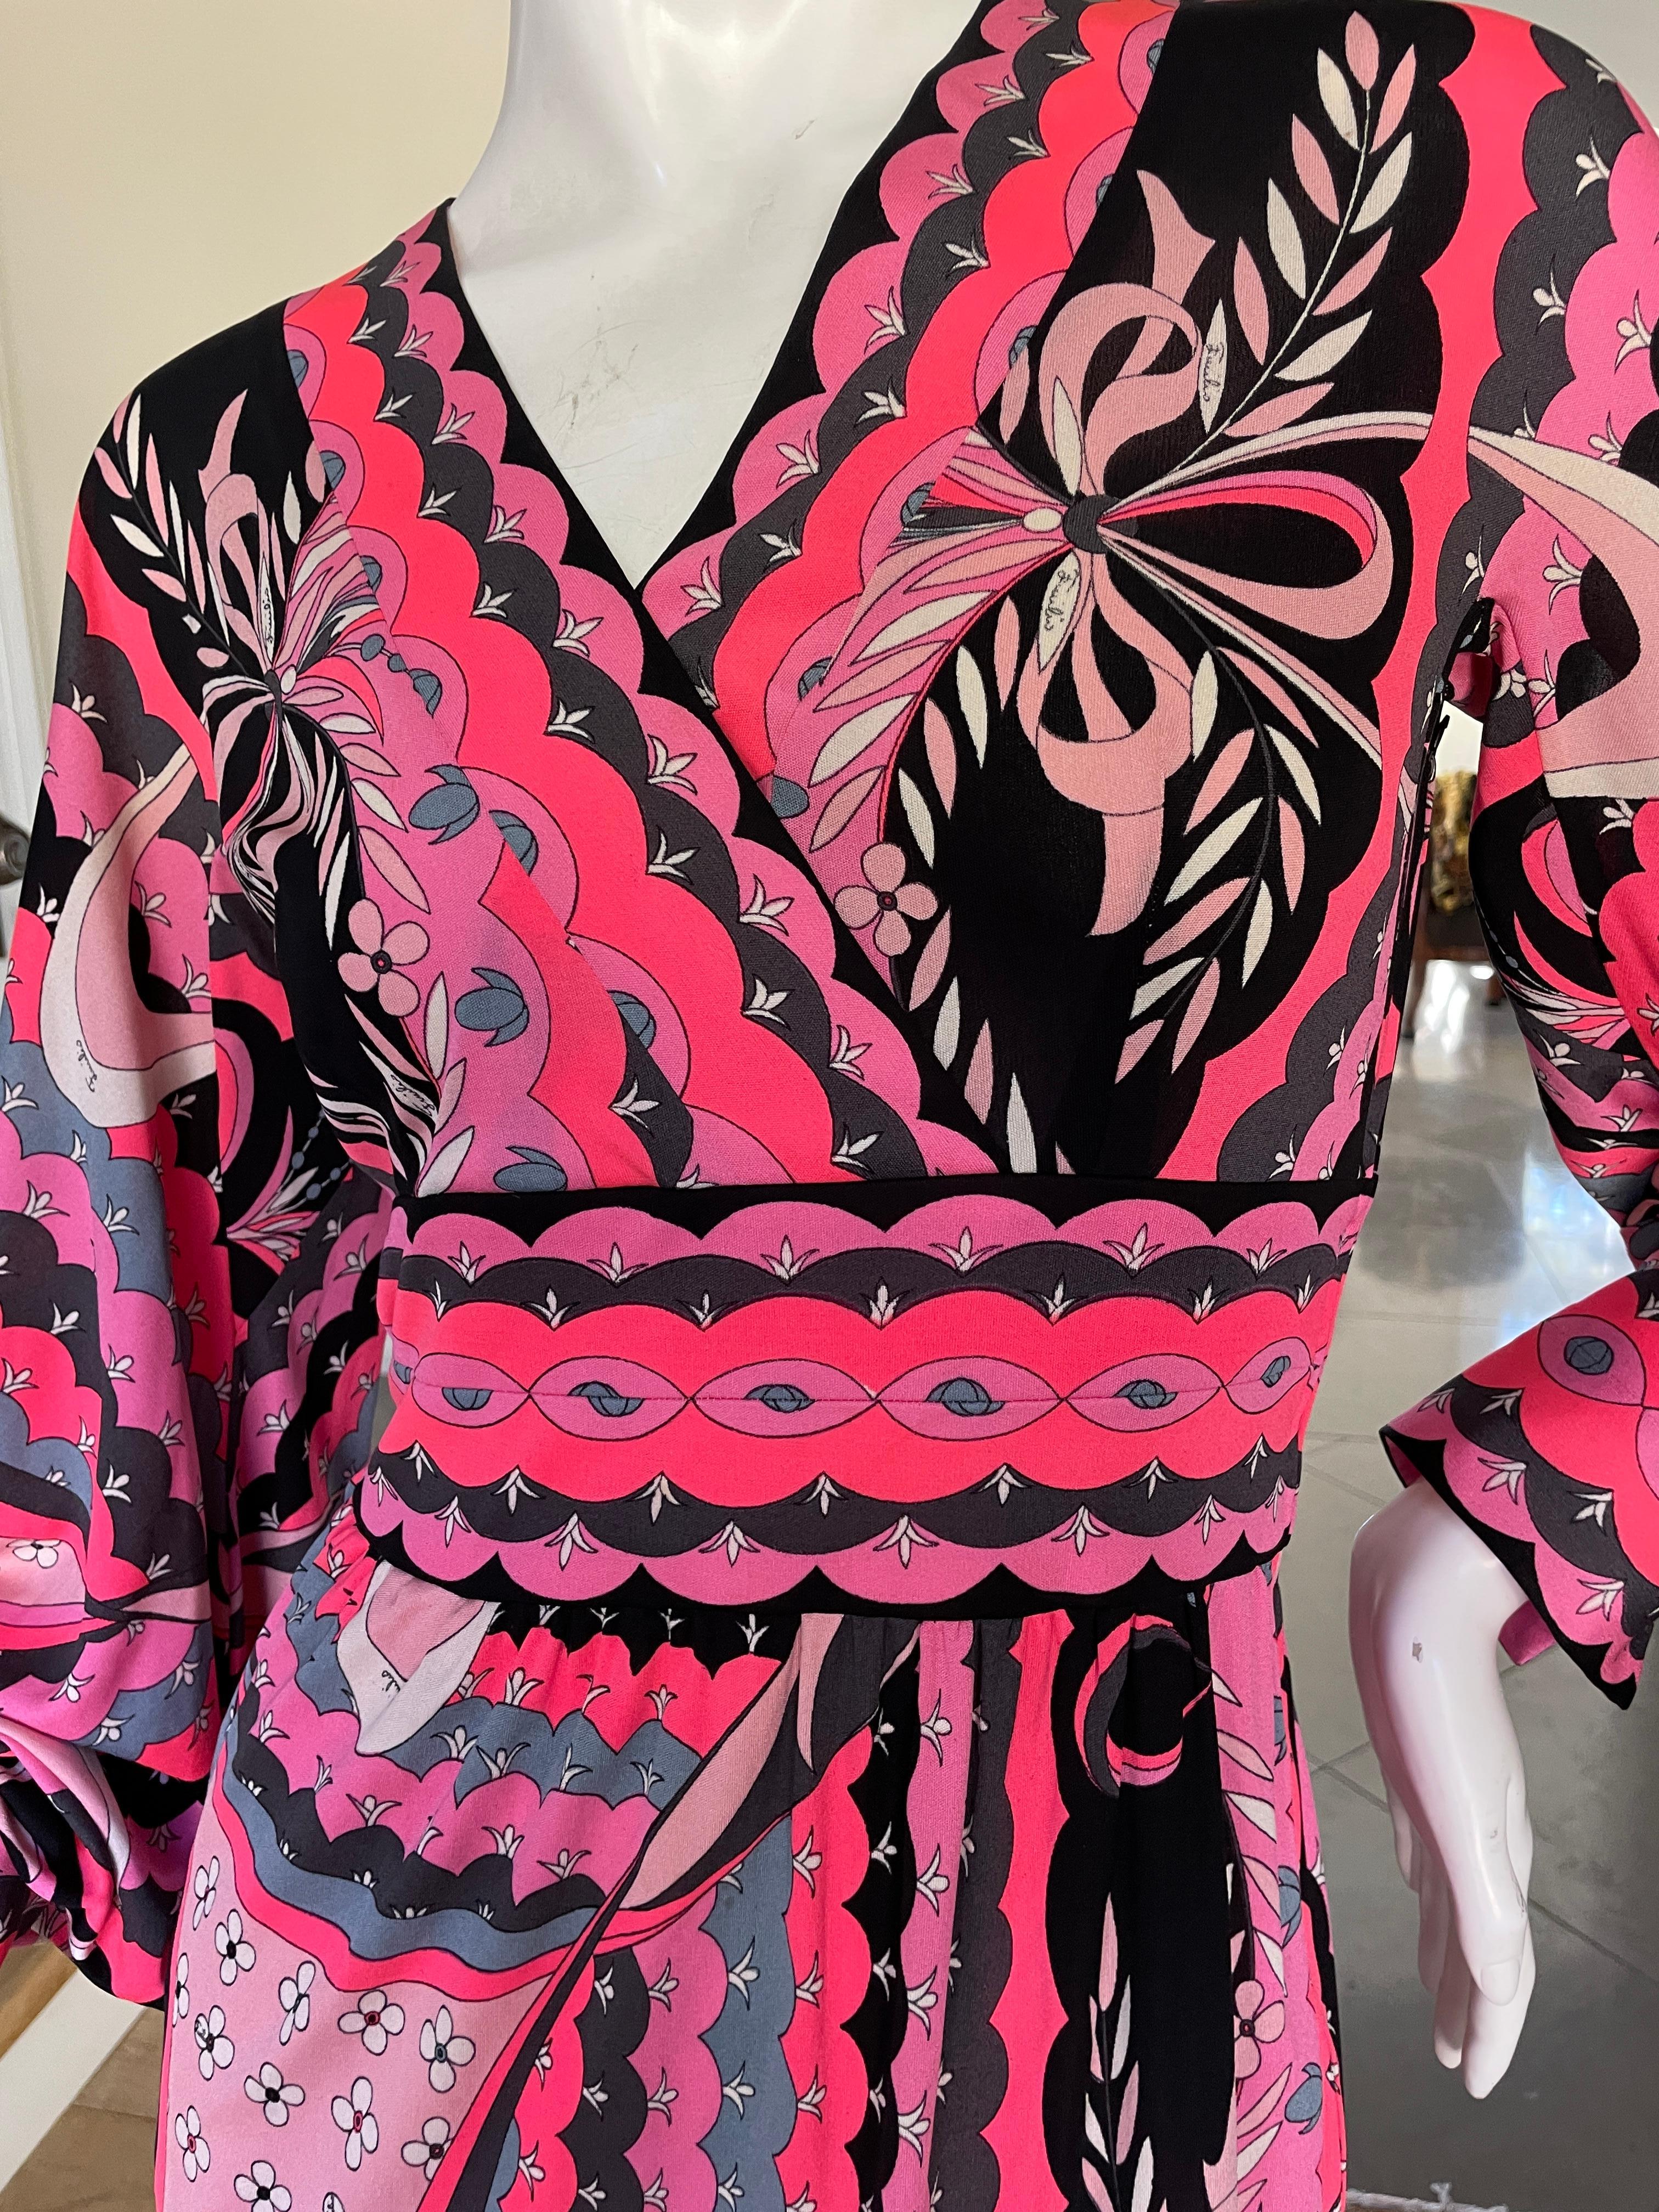 Emilio Pucci Vintage 1960's Silk Jersey Dress from Saks Fifth Avenue 1